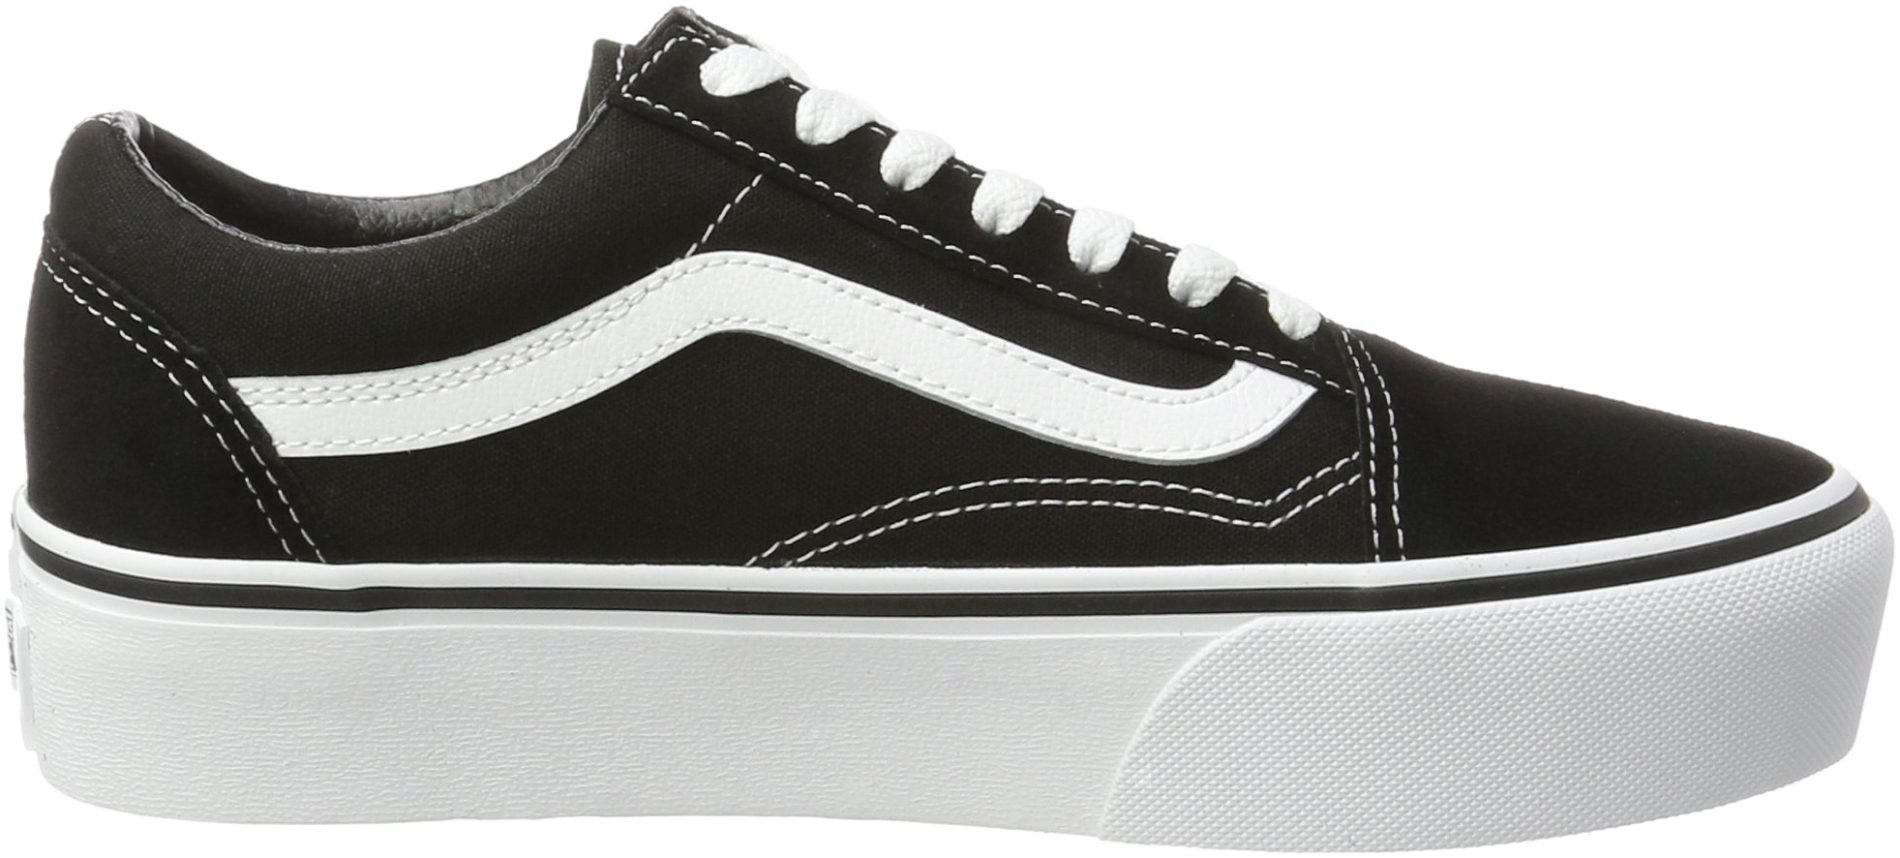 vans sizes in inches